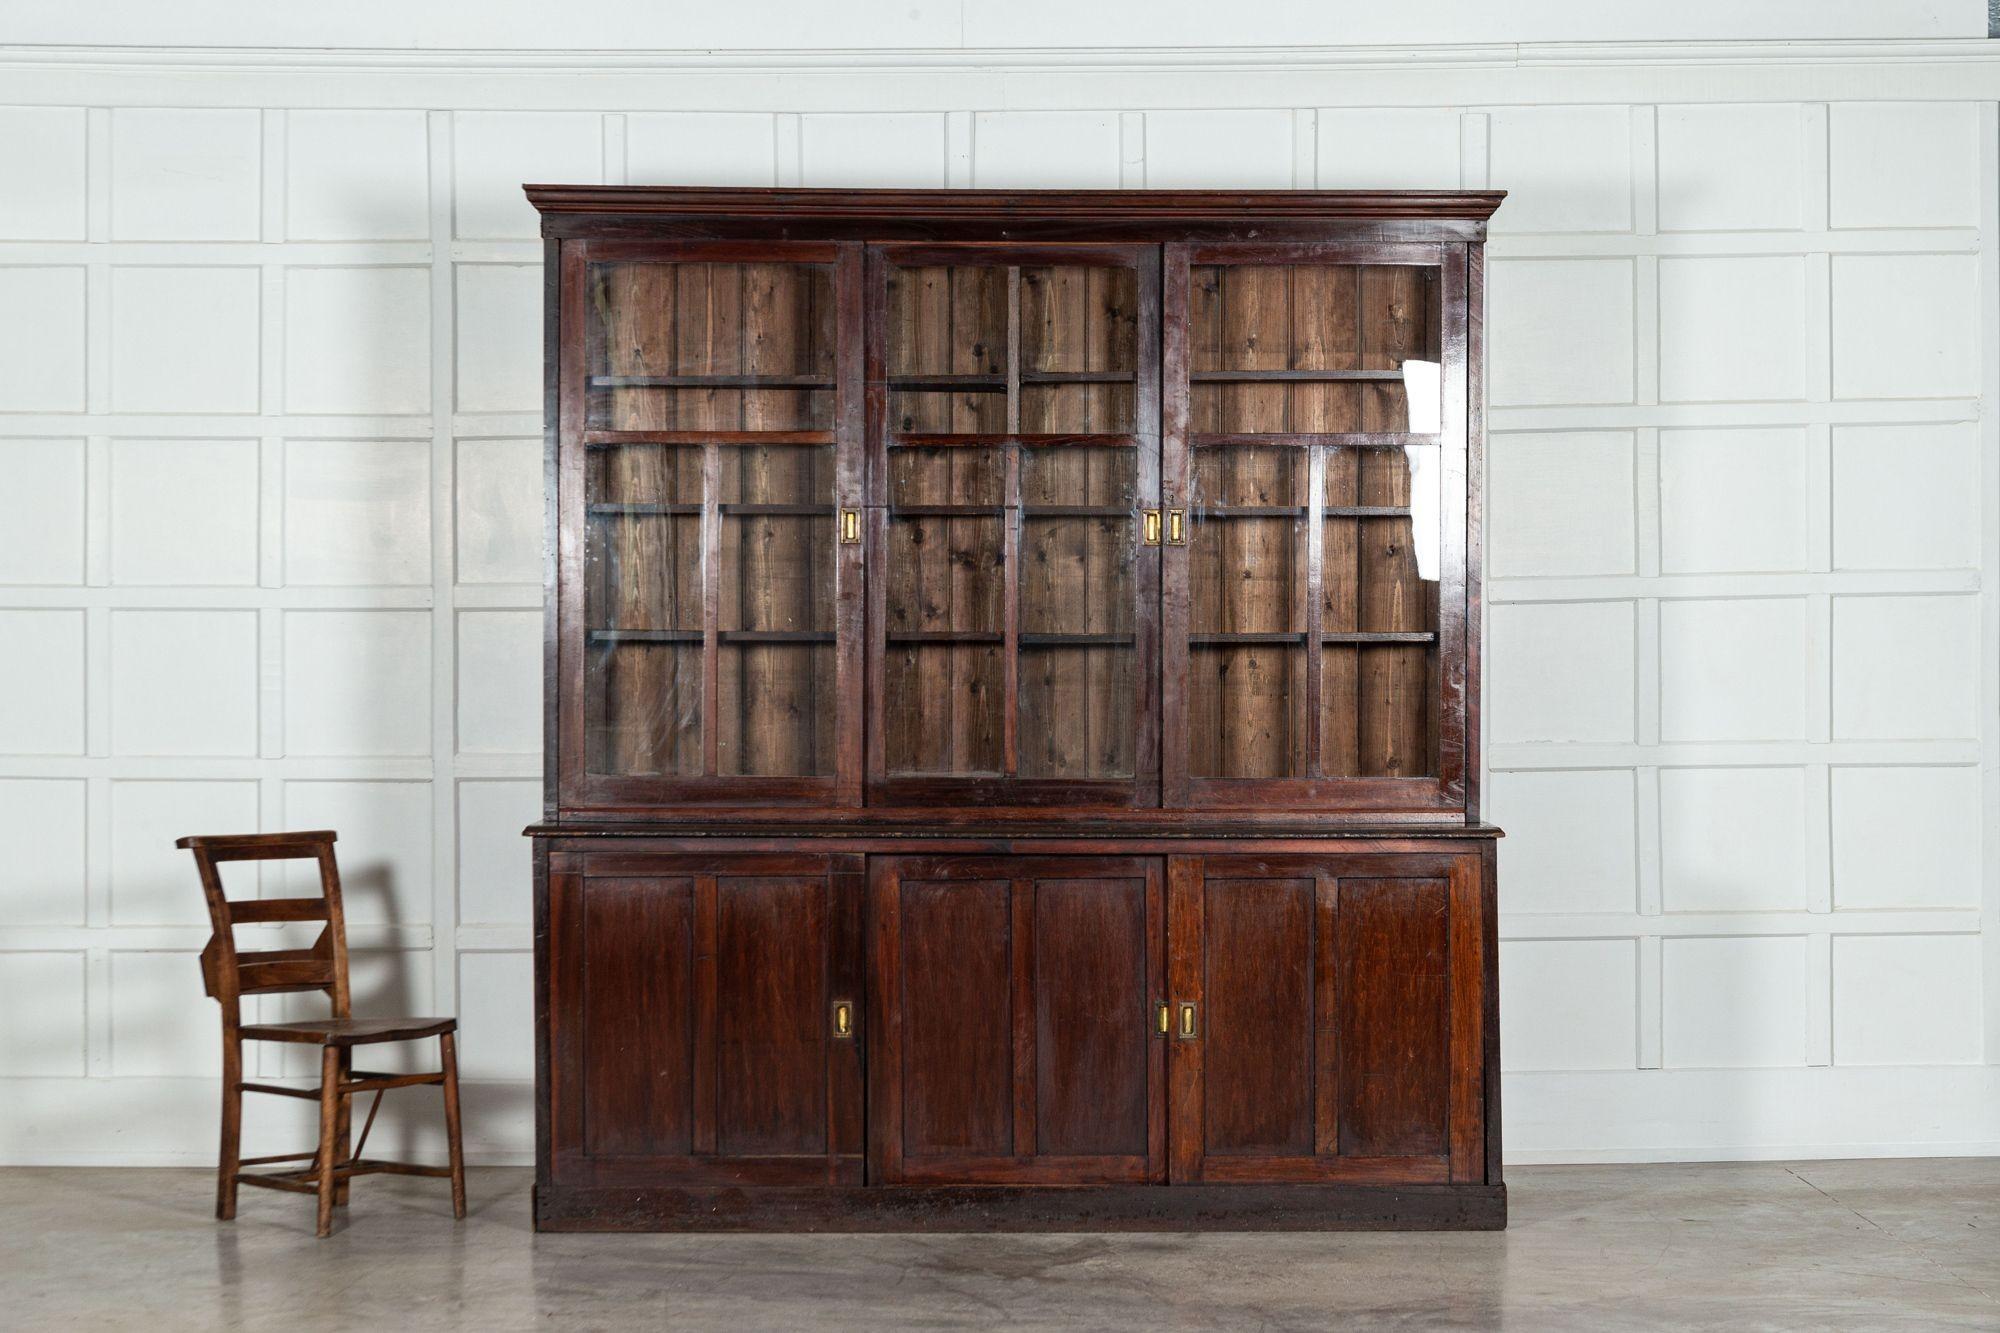 Large 19th Century English Mahogany & Pine Haberdashery Glazed Cabinet In Good Condition For Sale In Staffordshire, GB